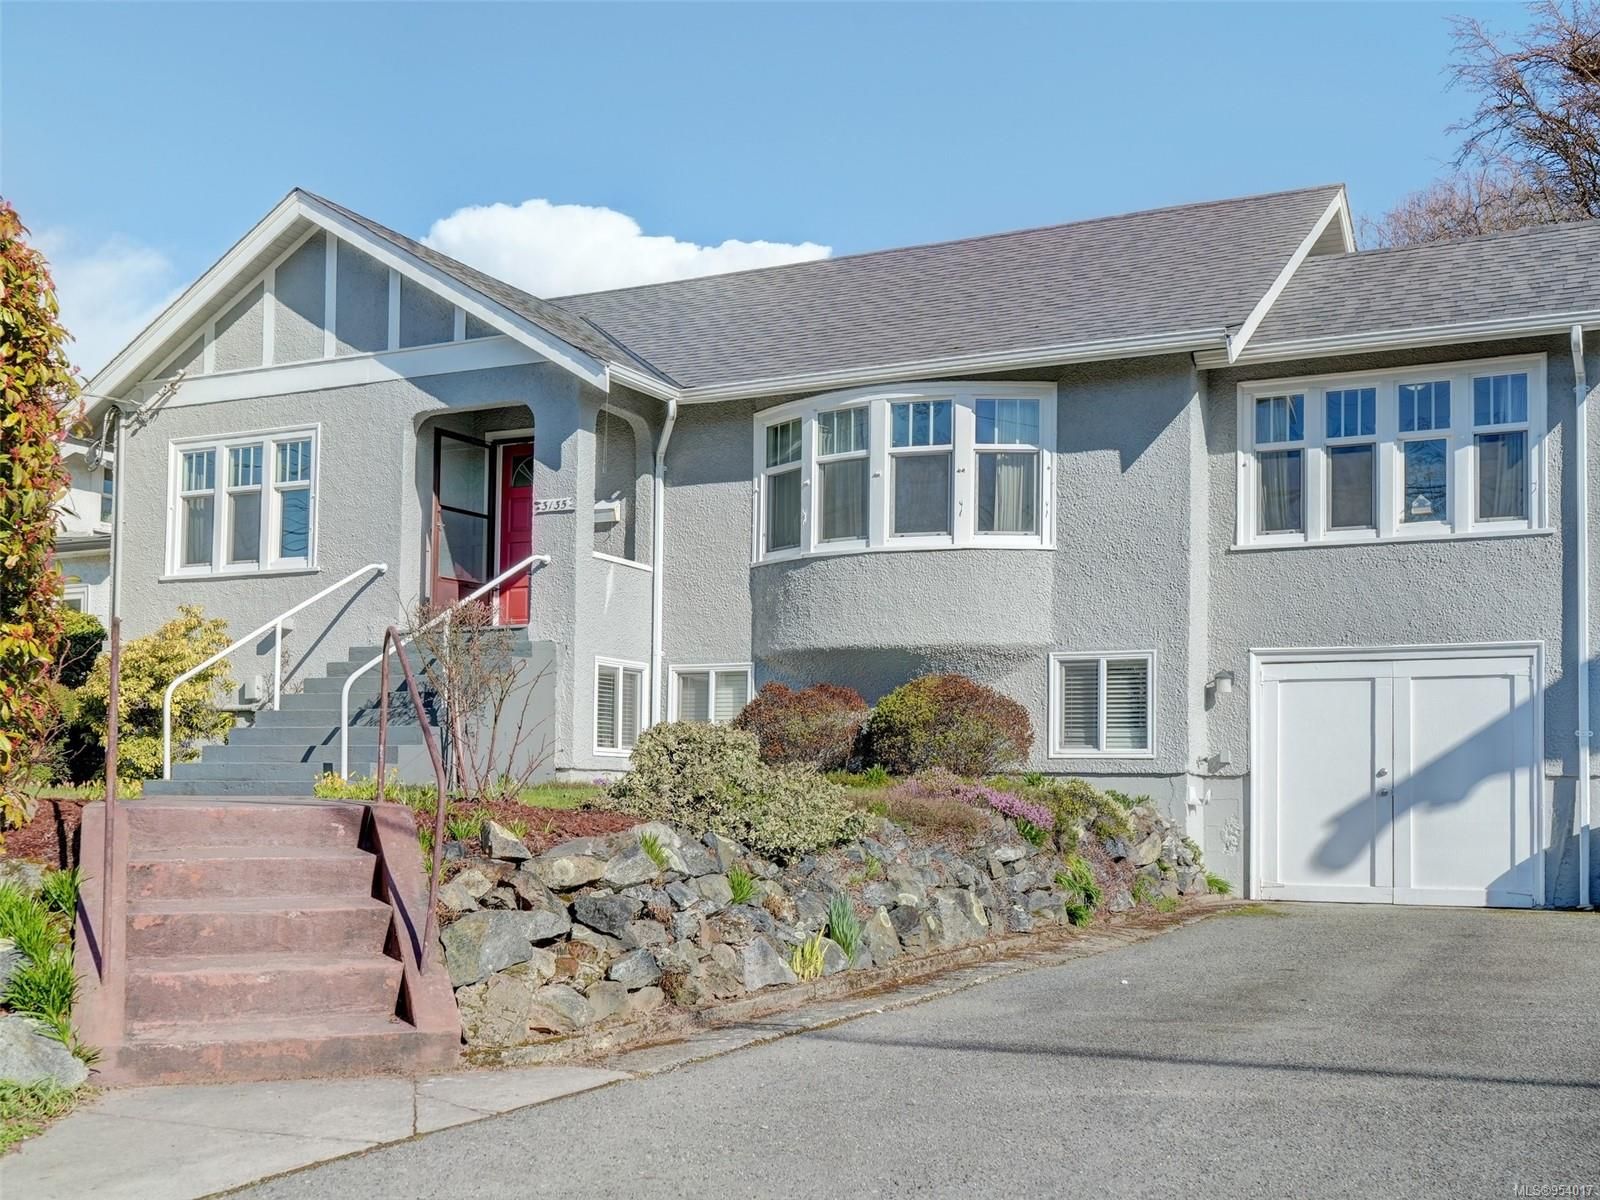 I have sold a property at 3135 Quadra St in Victoria
